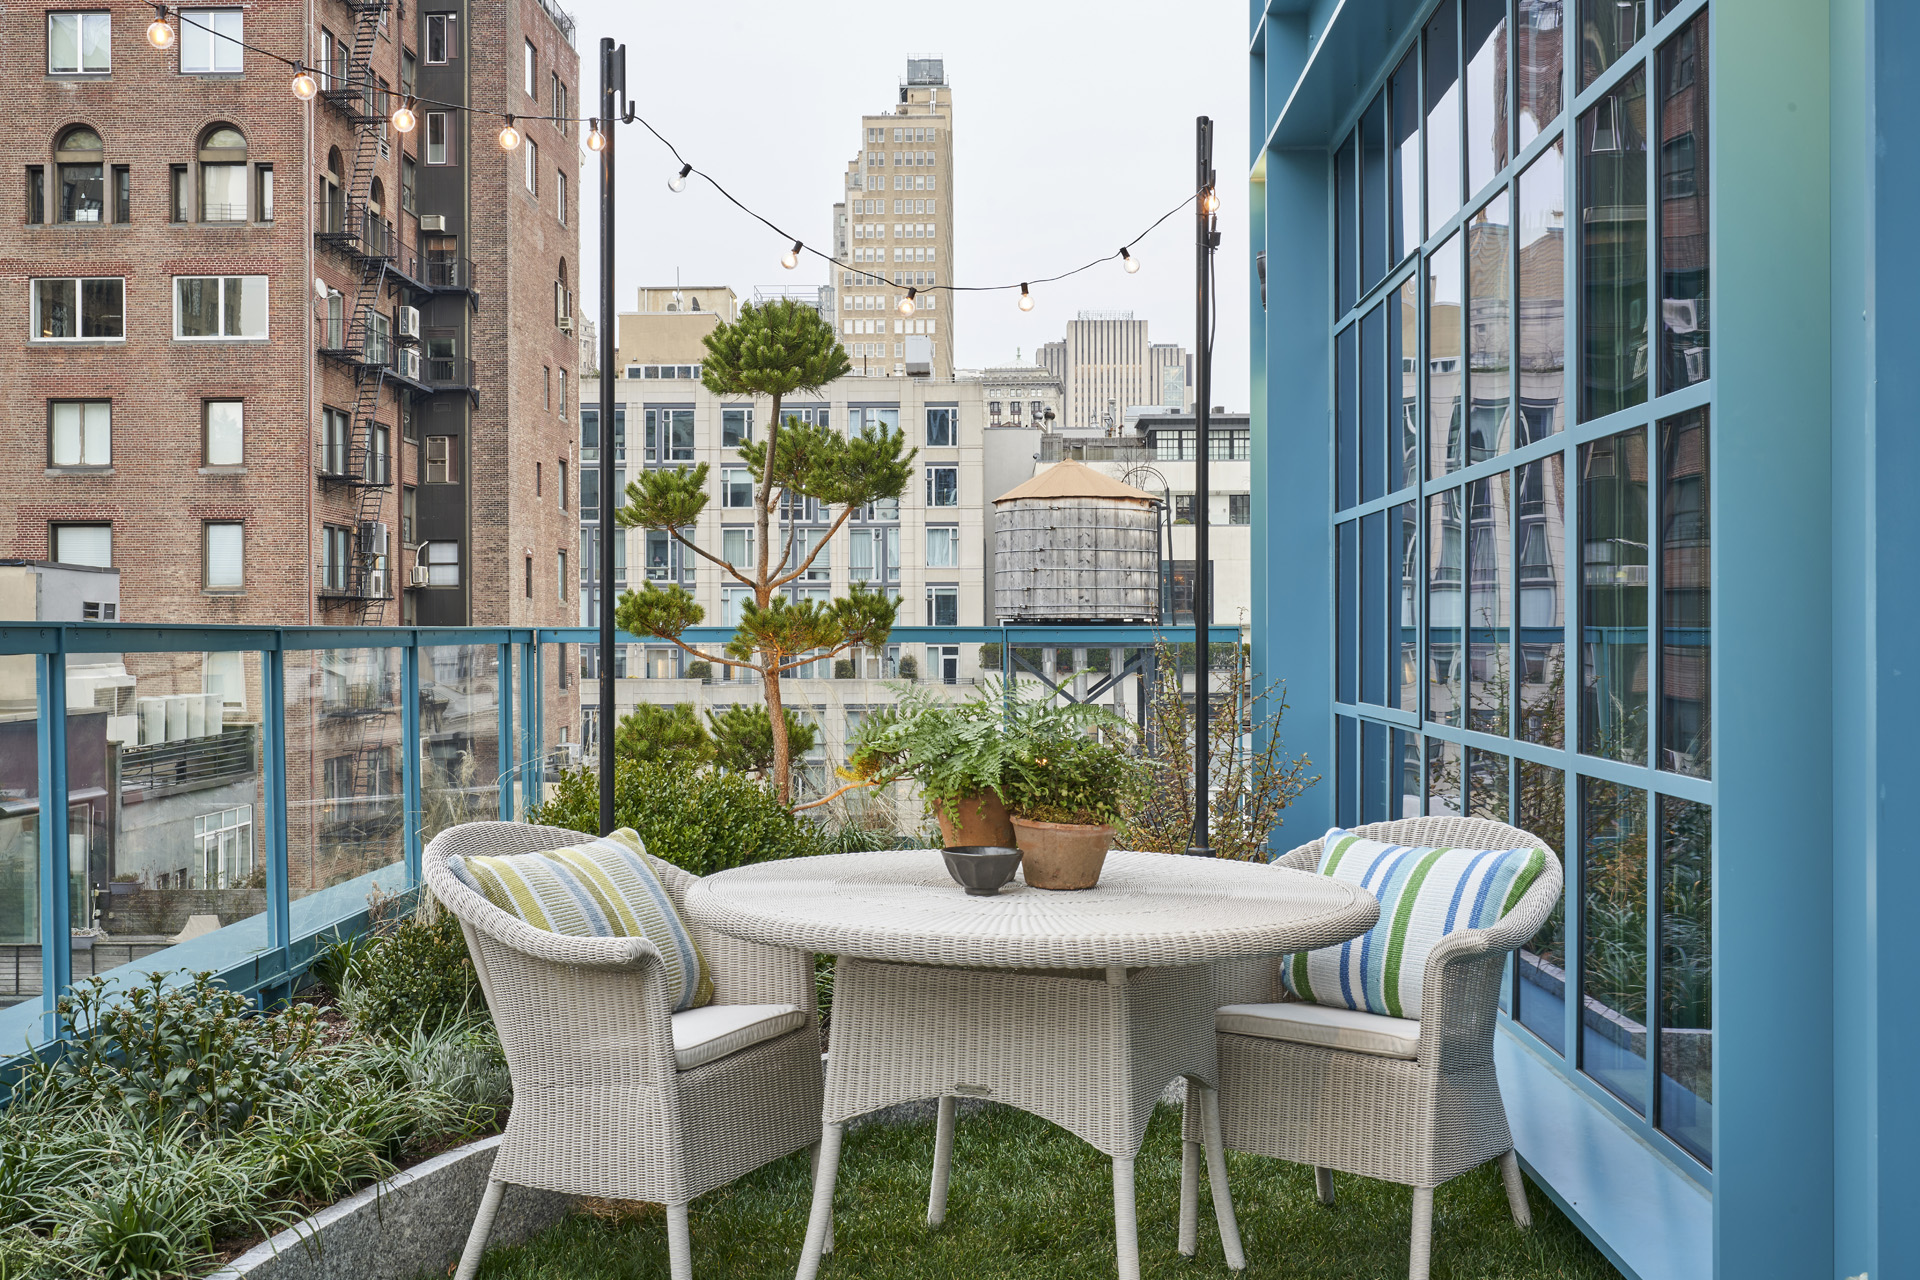 A Sunny Delight: Warren Street Hotel, New York – Review